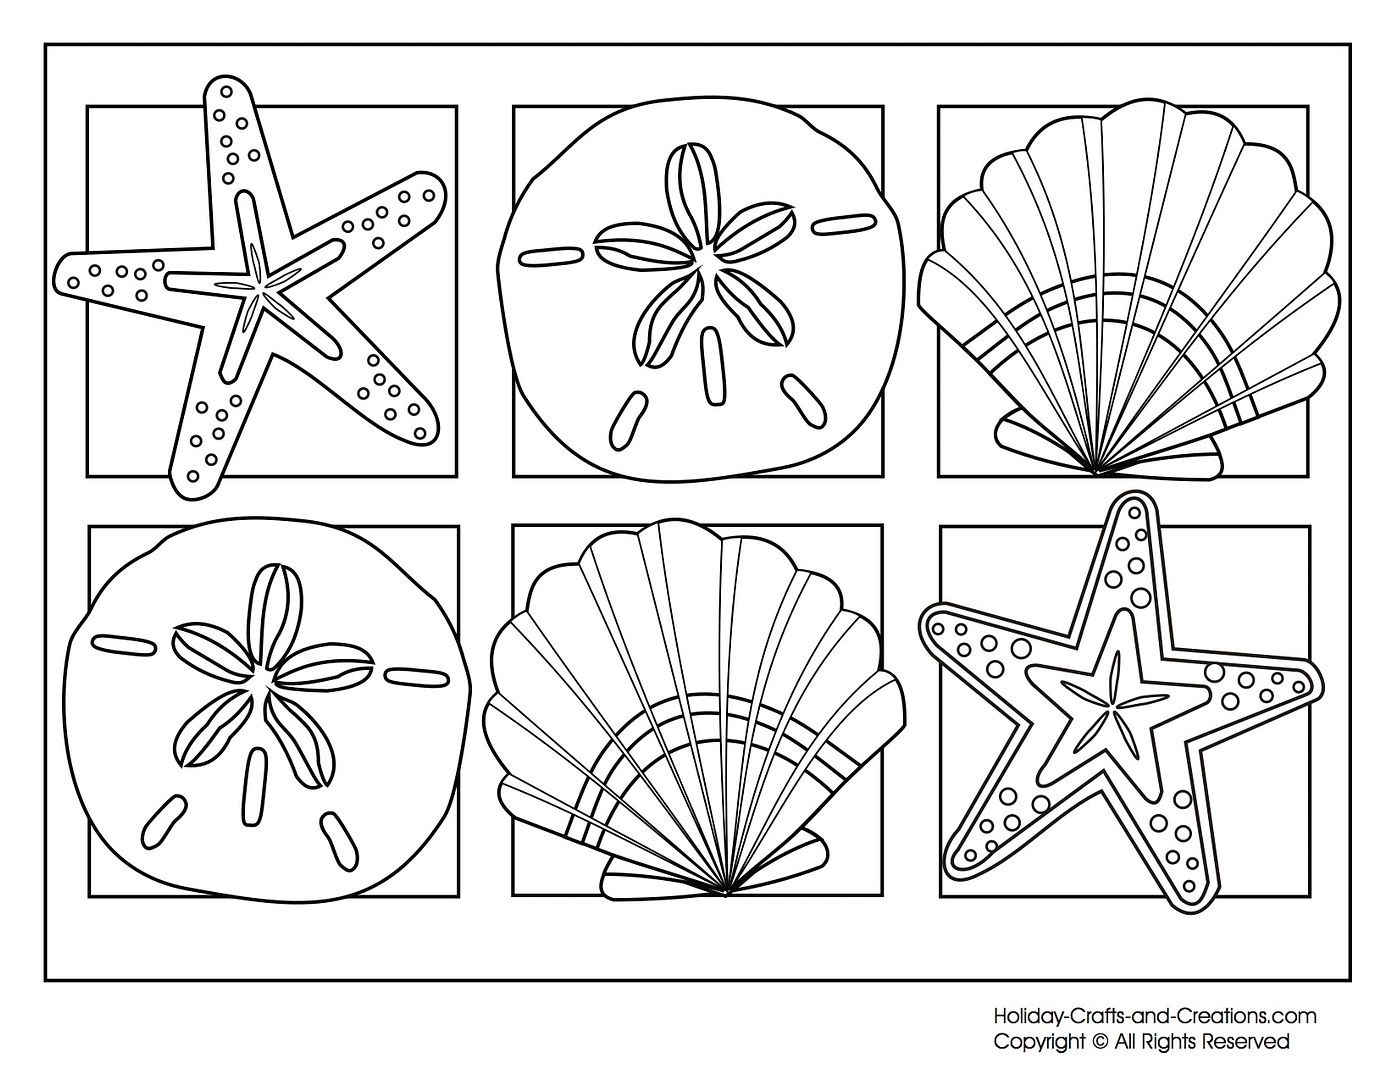 18 fun free printable summer coloring pages for kids good ones